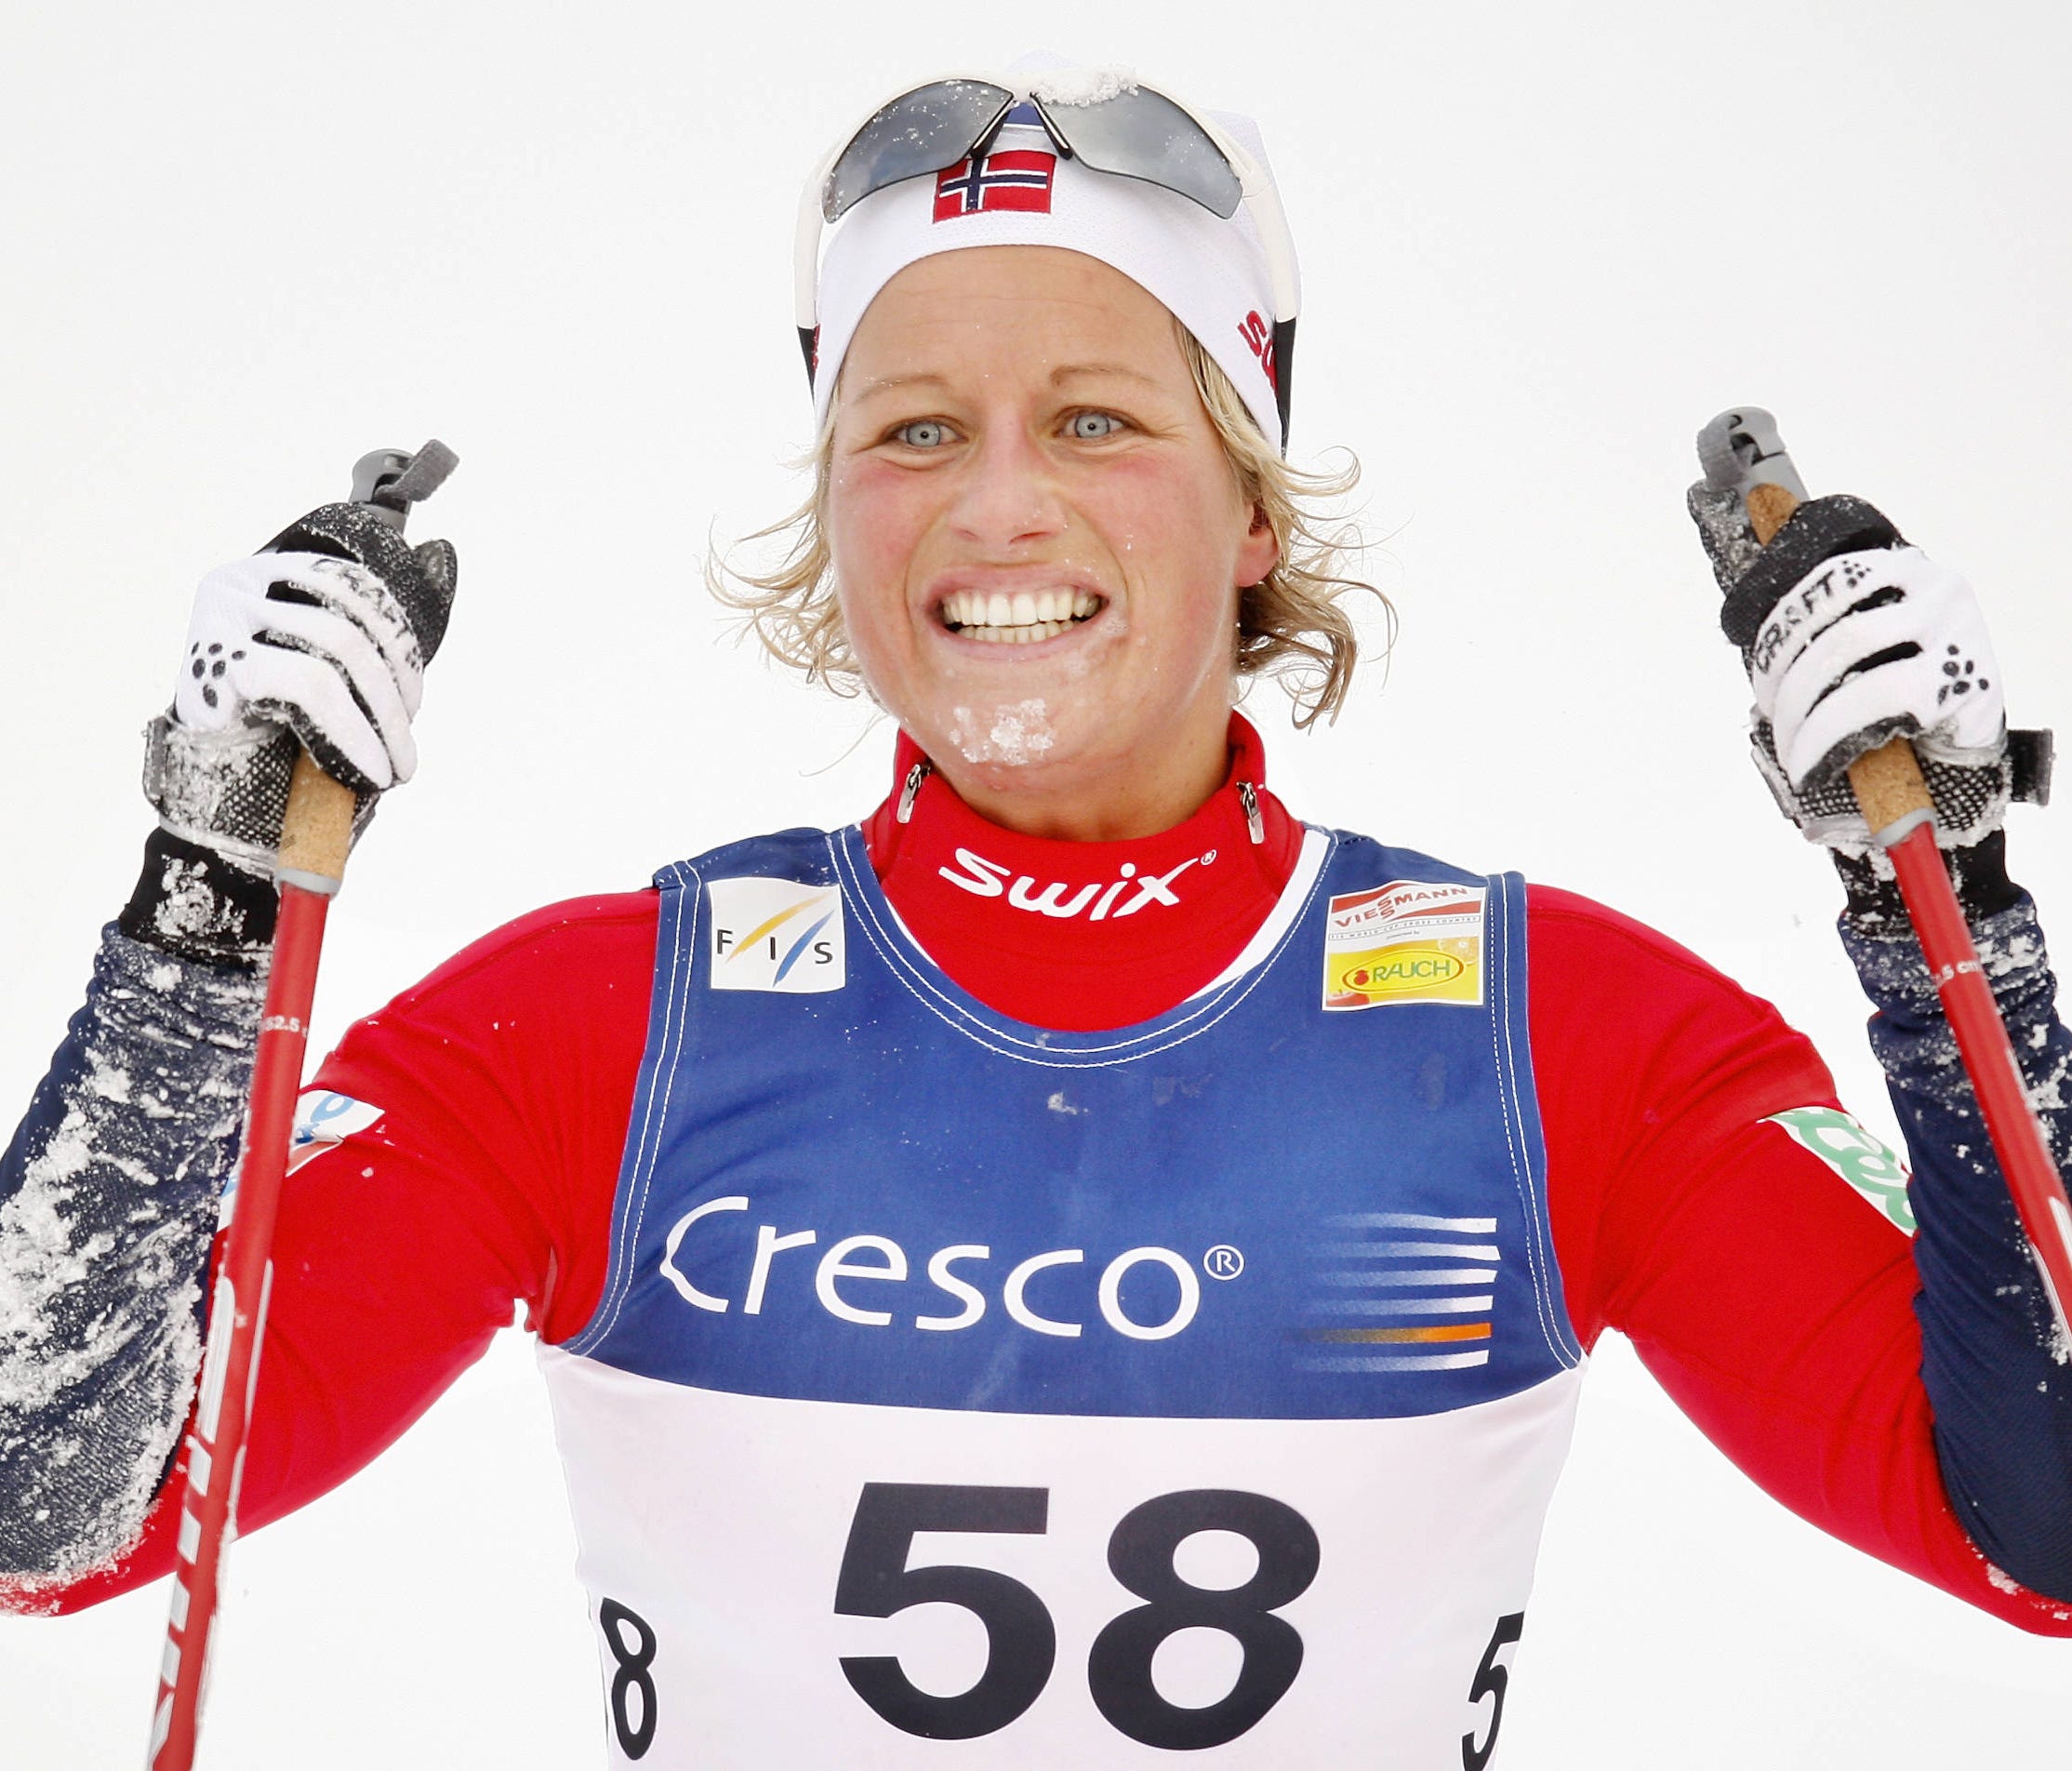 (FILES) In this file photo taken on November 24, 2007, Norway's Vibeke Skofterud, second placed in the women's World Cup 10-kilometer free style cross-country ski race, reacts as she crosses the finish line in Beitostolen, Norway.  Skofterud, 38, was 